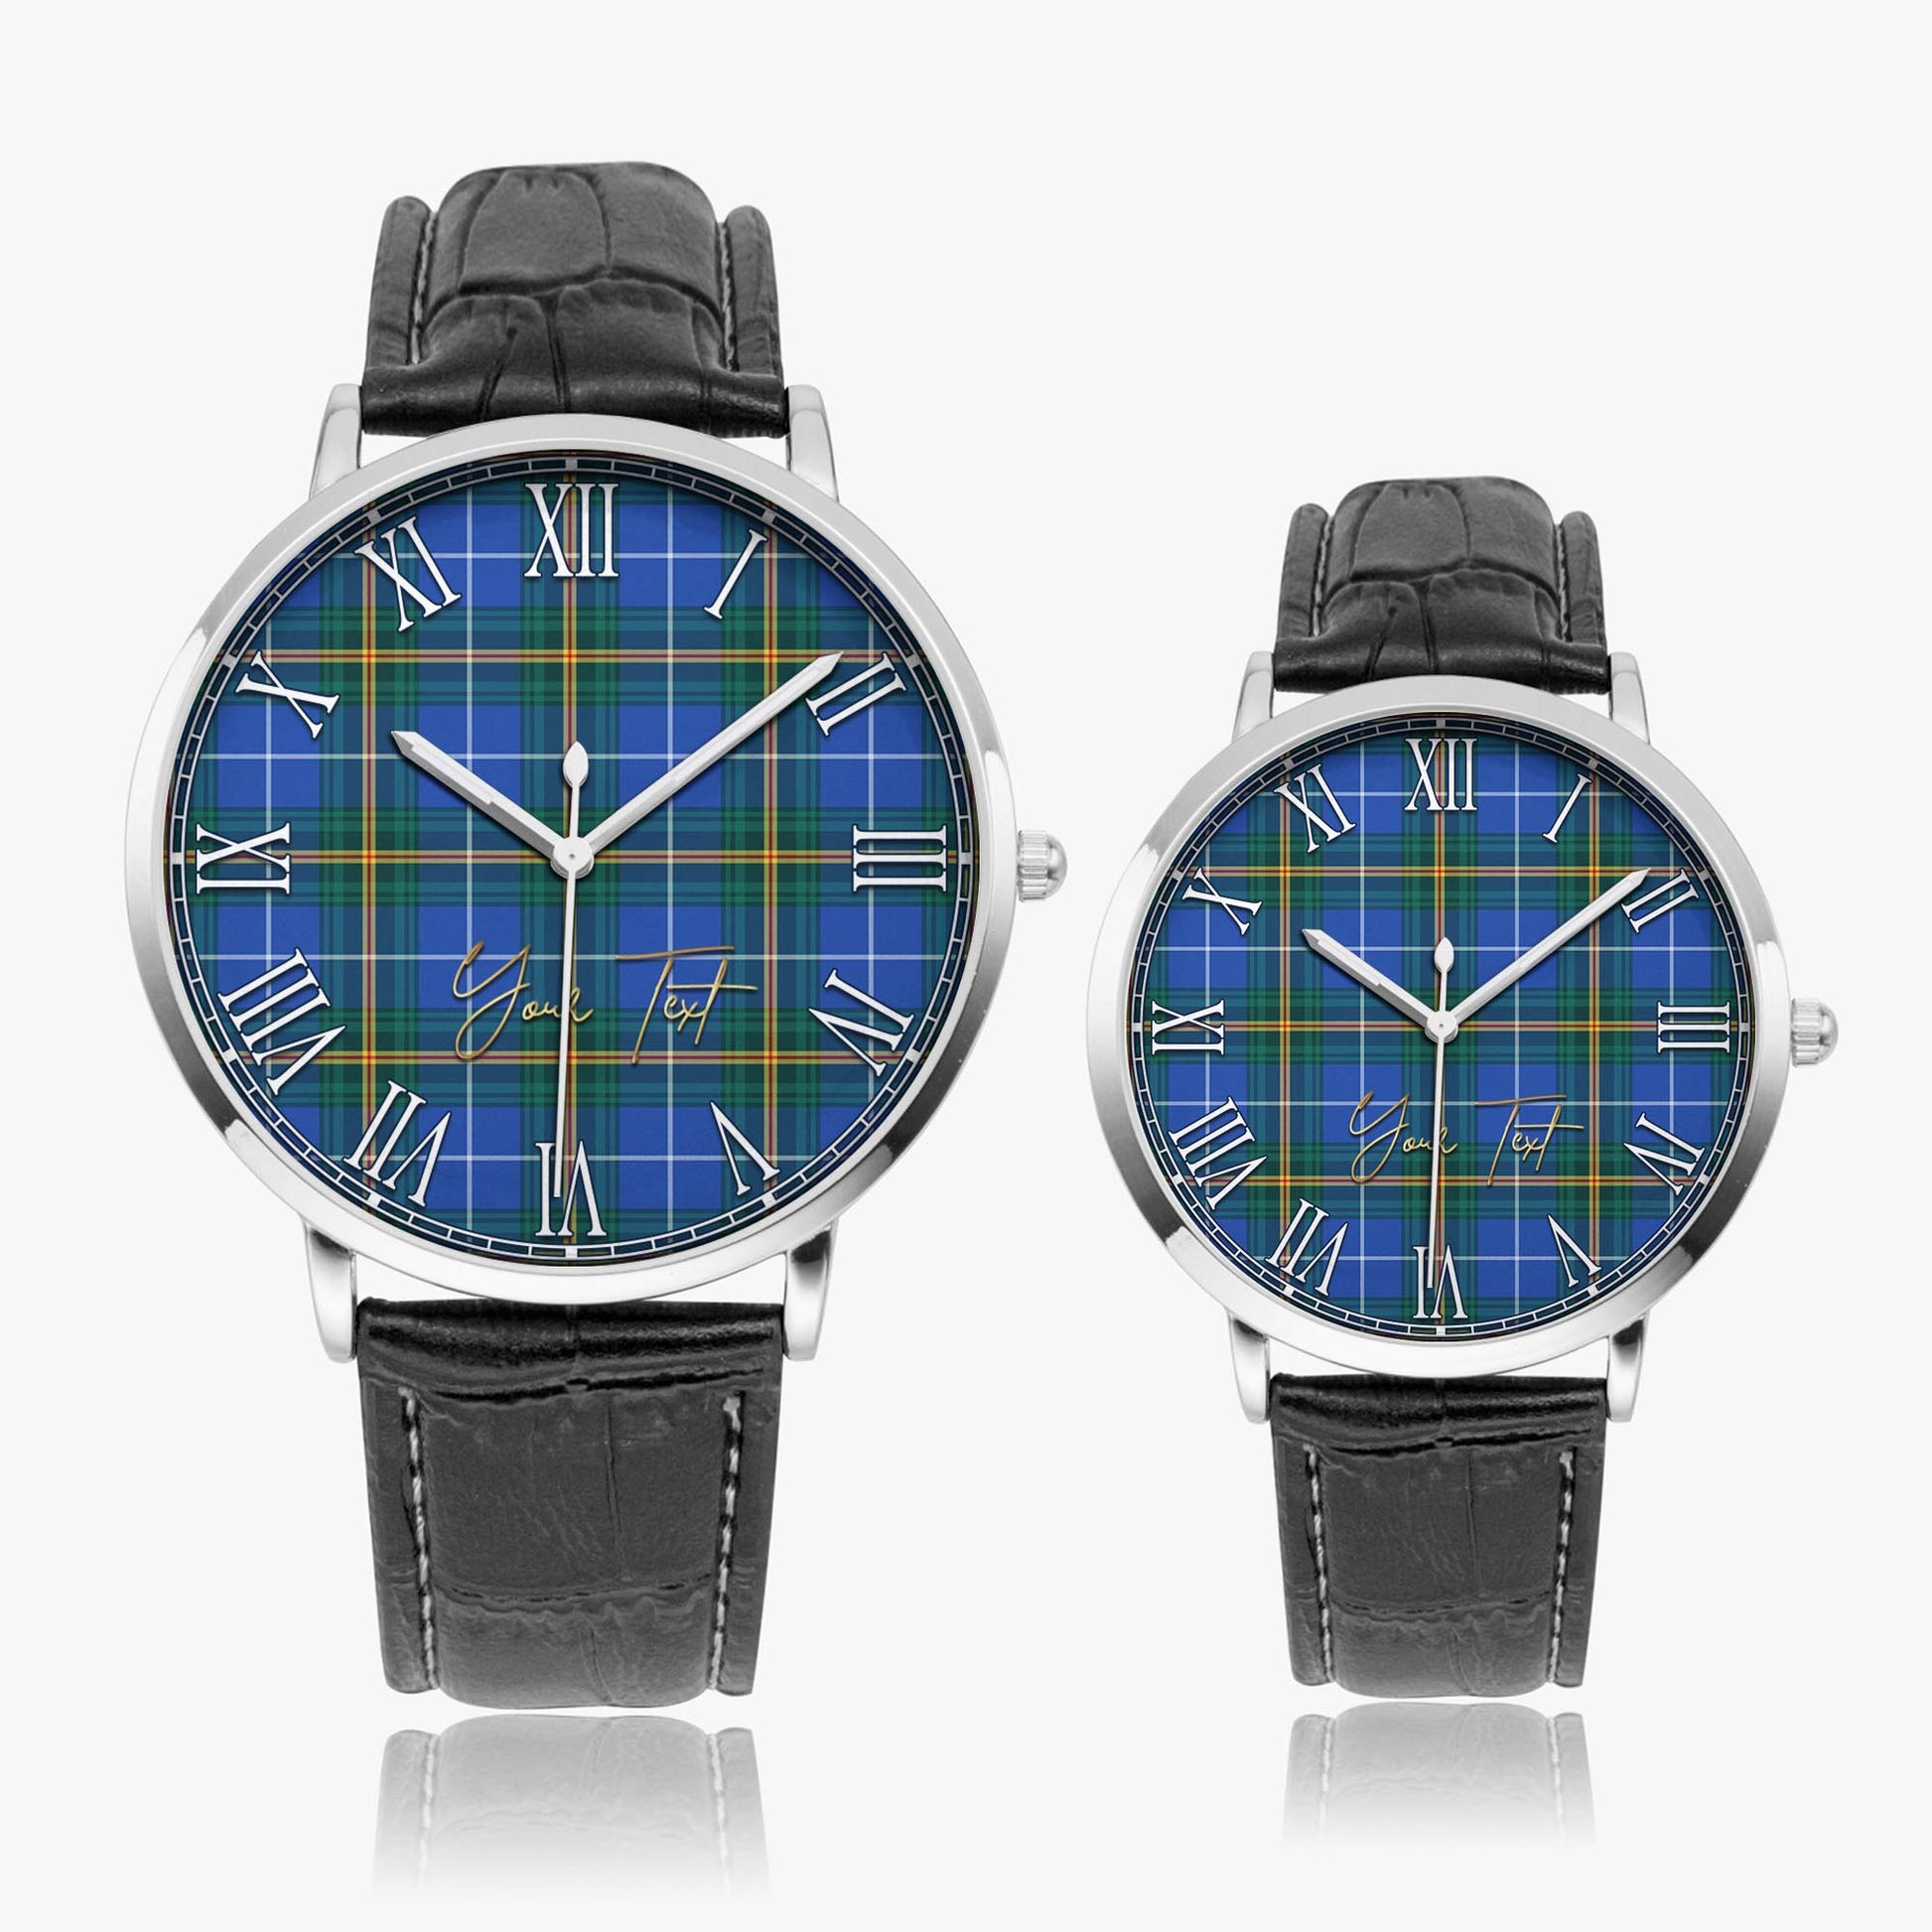 Nova Scotia Province Canada Tartan Personalized Your Text Leather Trap Quartz Watch Ultra Thin Silver Case With Black Leather Strap - Tartanvibesclothing